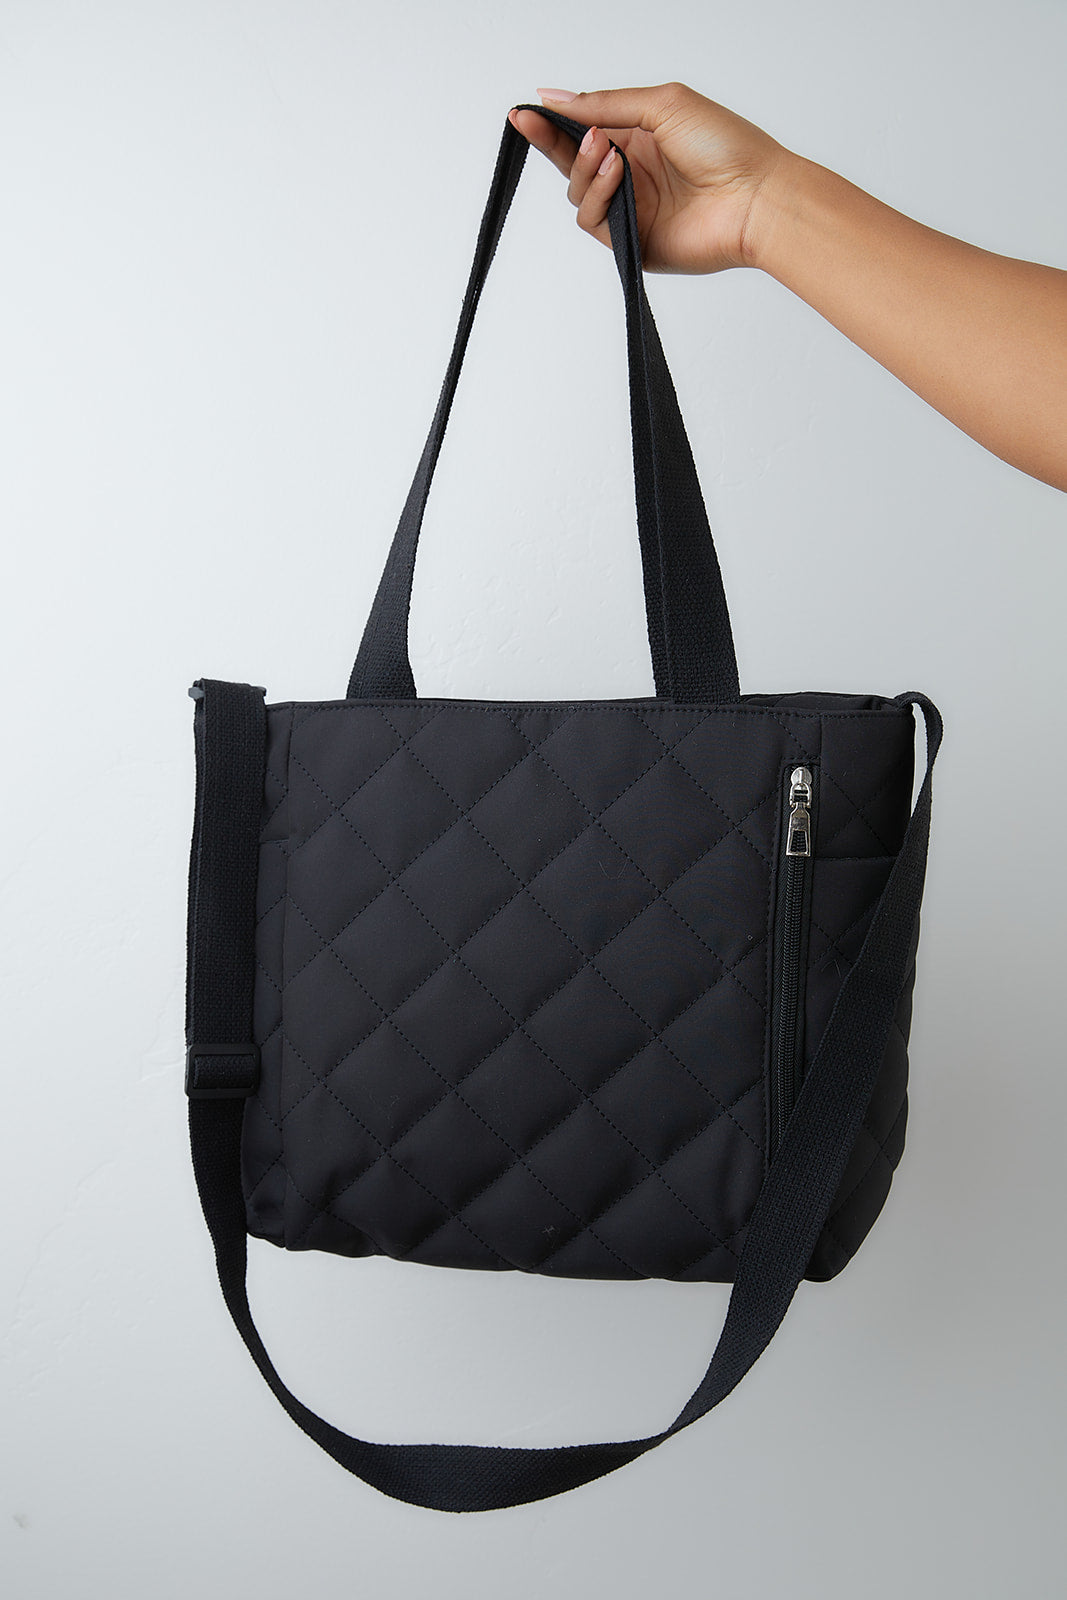 There She Goes Bag in Black - 5/15/2023